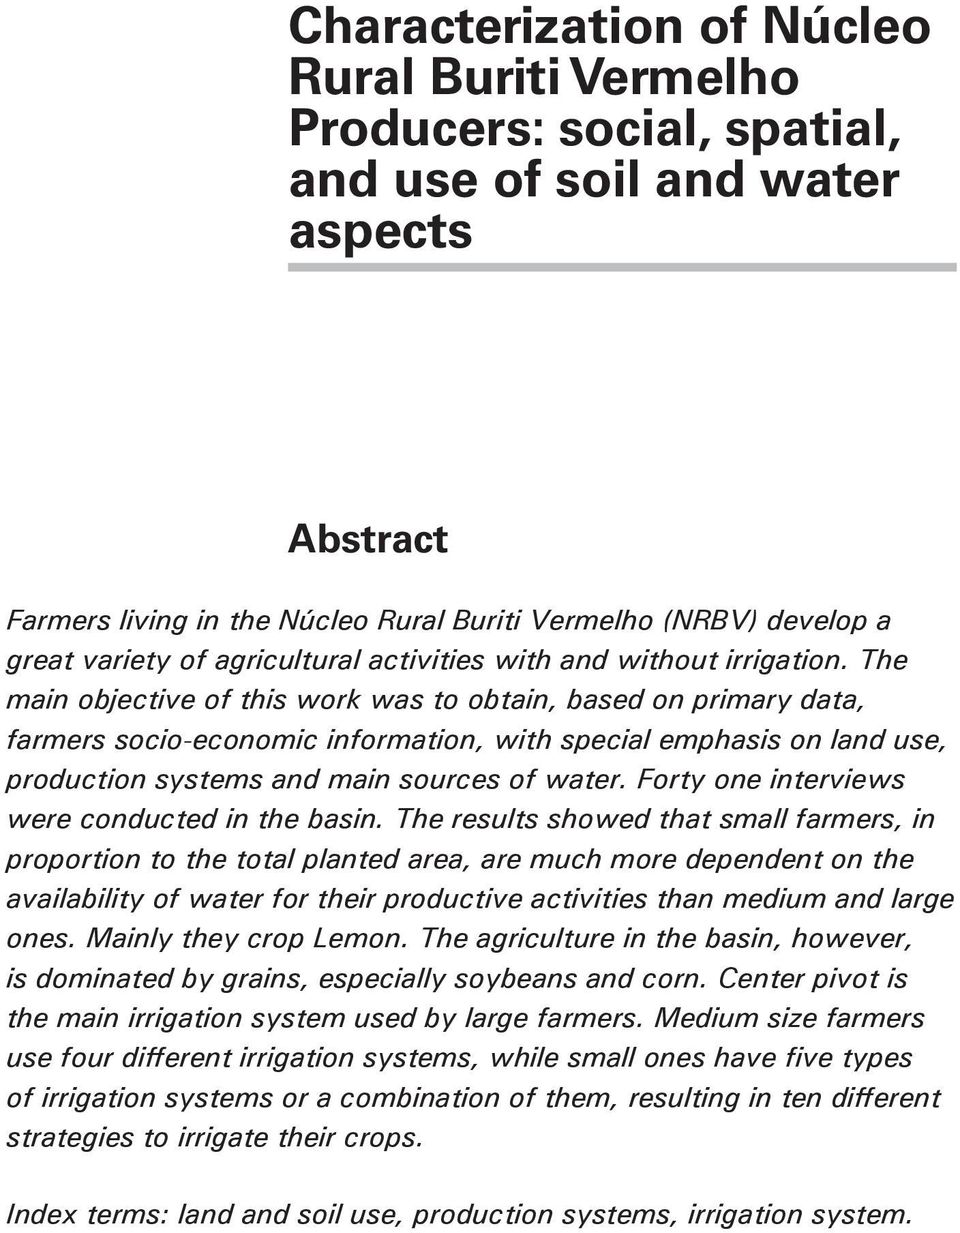 The main objective of this work was to obtain, based on primary data, farmers socio-economic information, with special emphasis on land use, production systems and main sources of water.